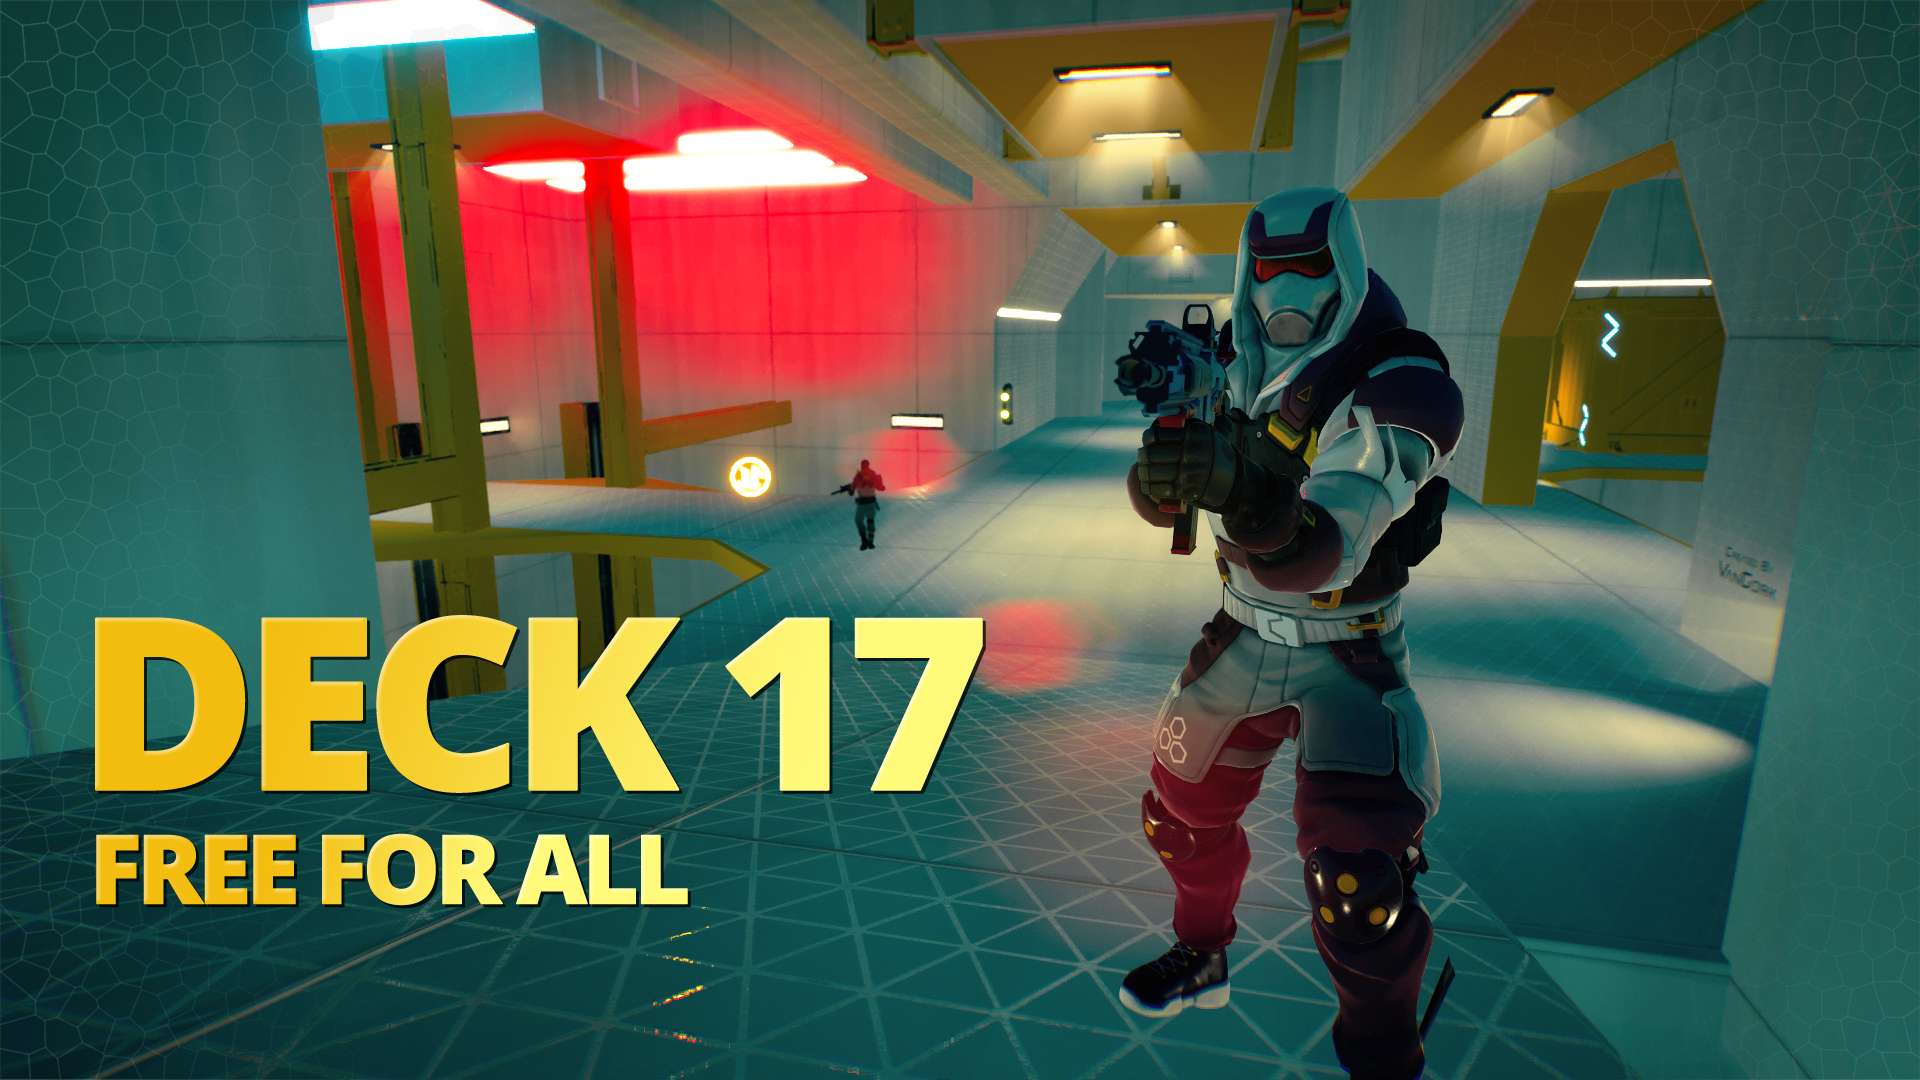 DECK 17 - FREE FOR ALL